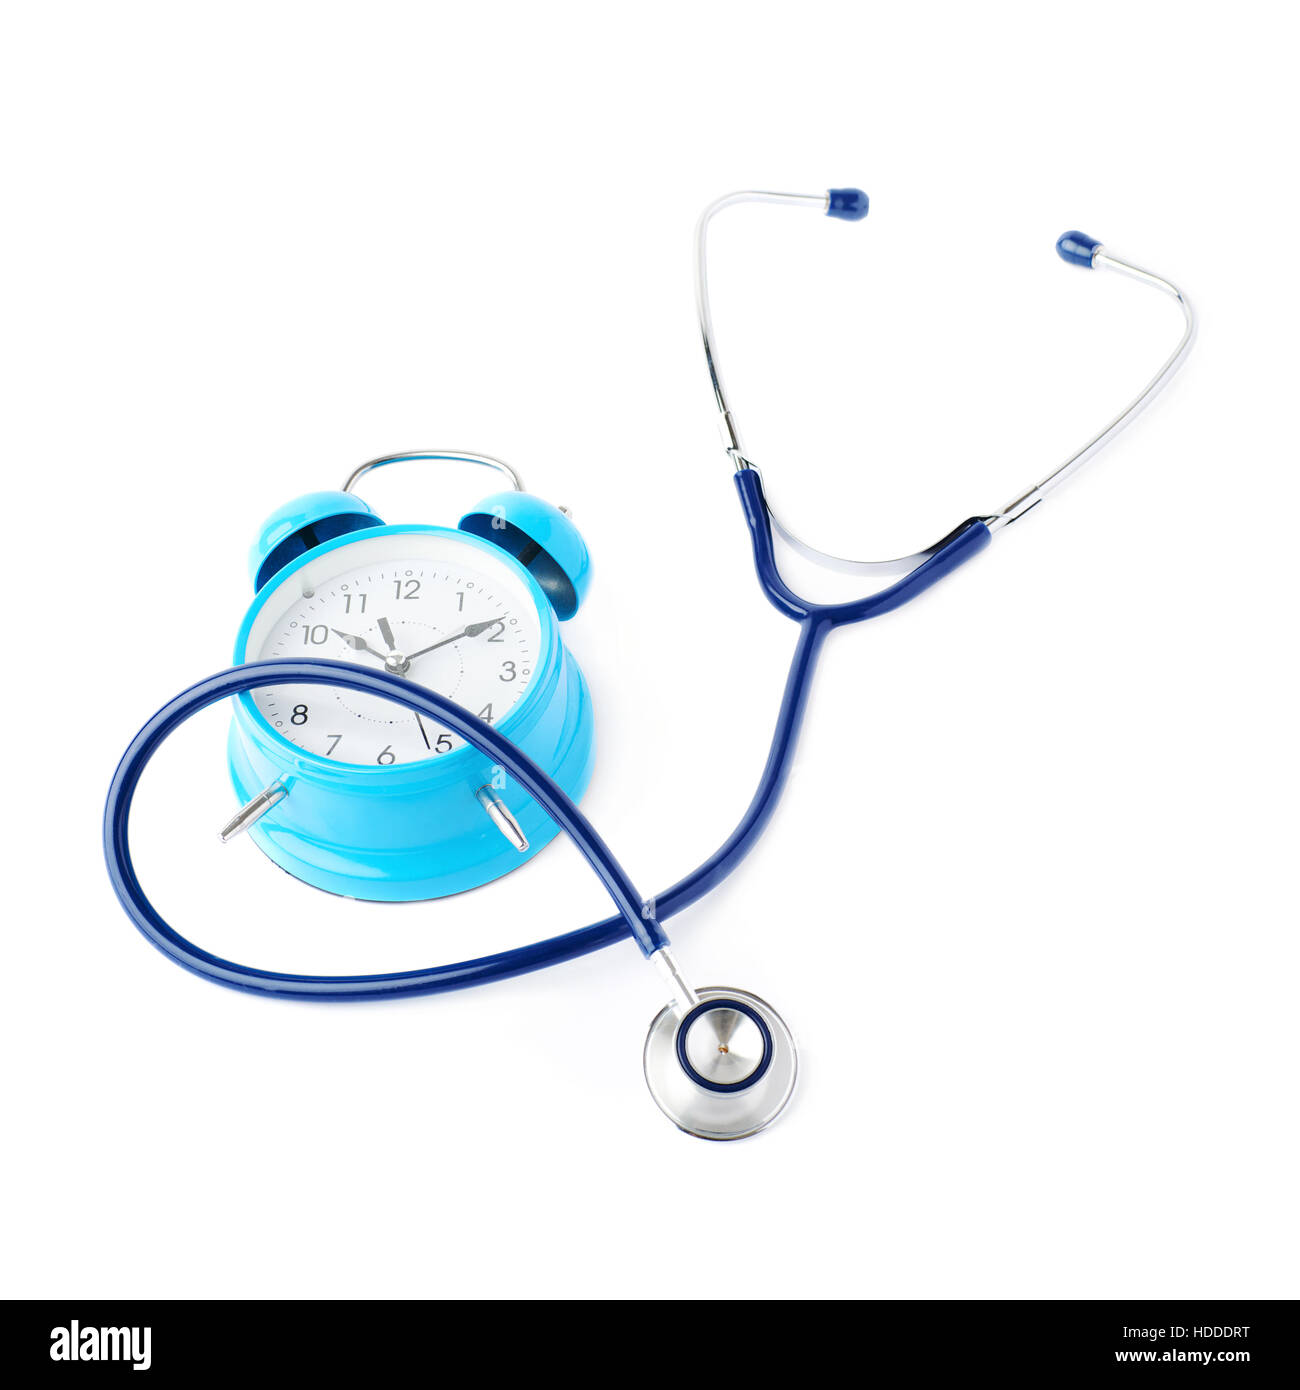 Close up view of blue stethoscope with alarm clock over isolated white background Stock Photo